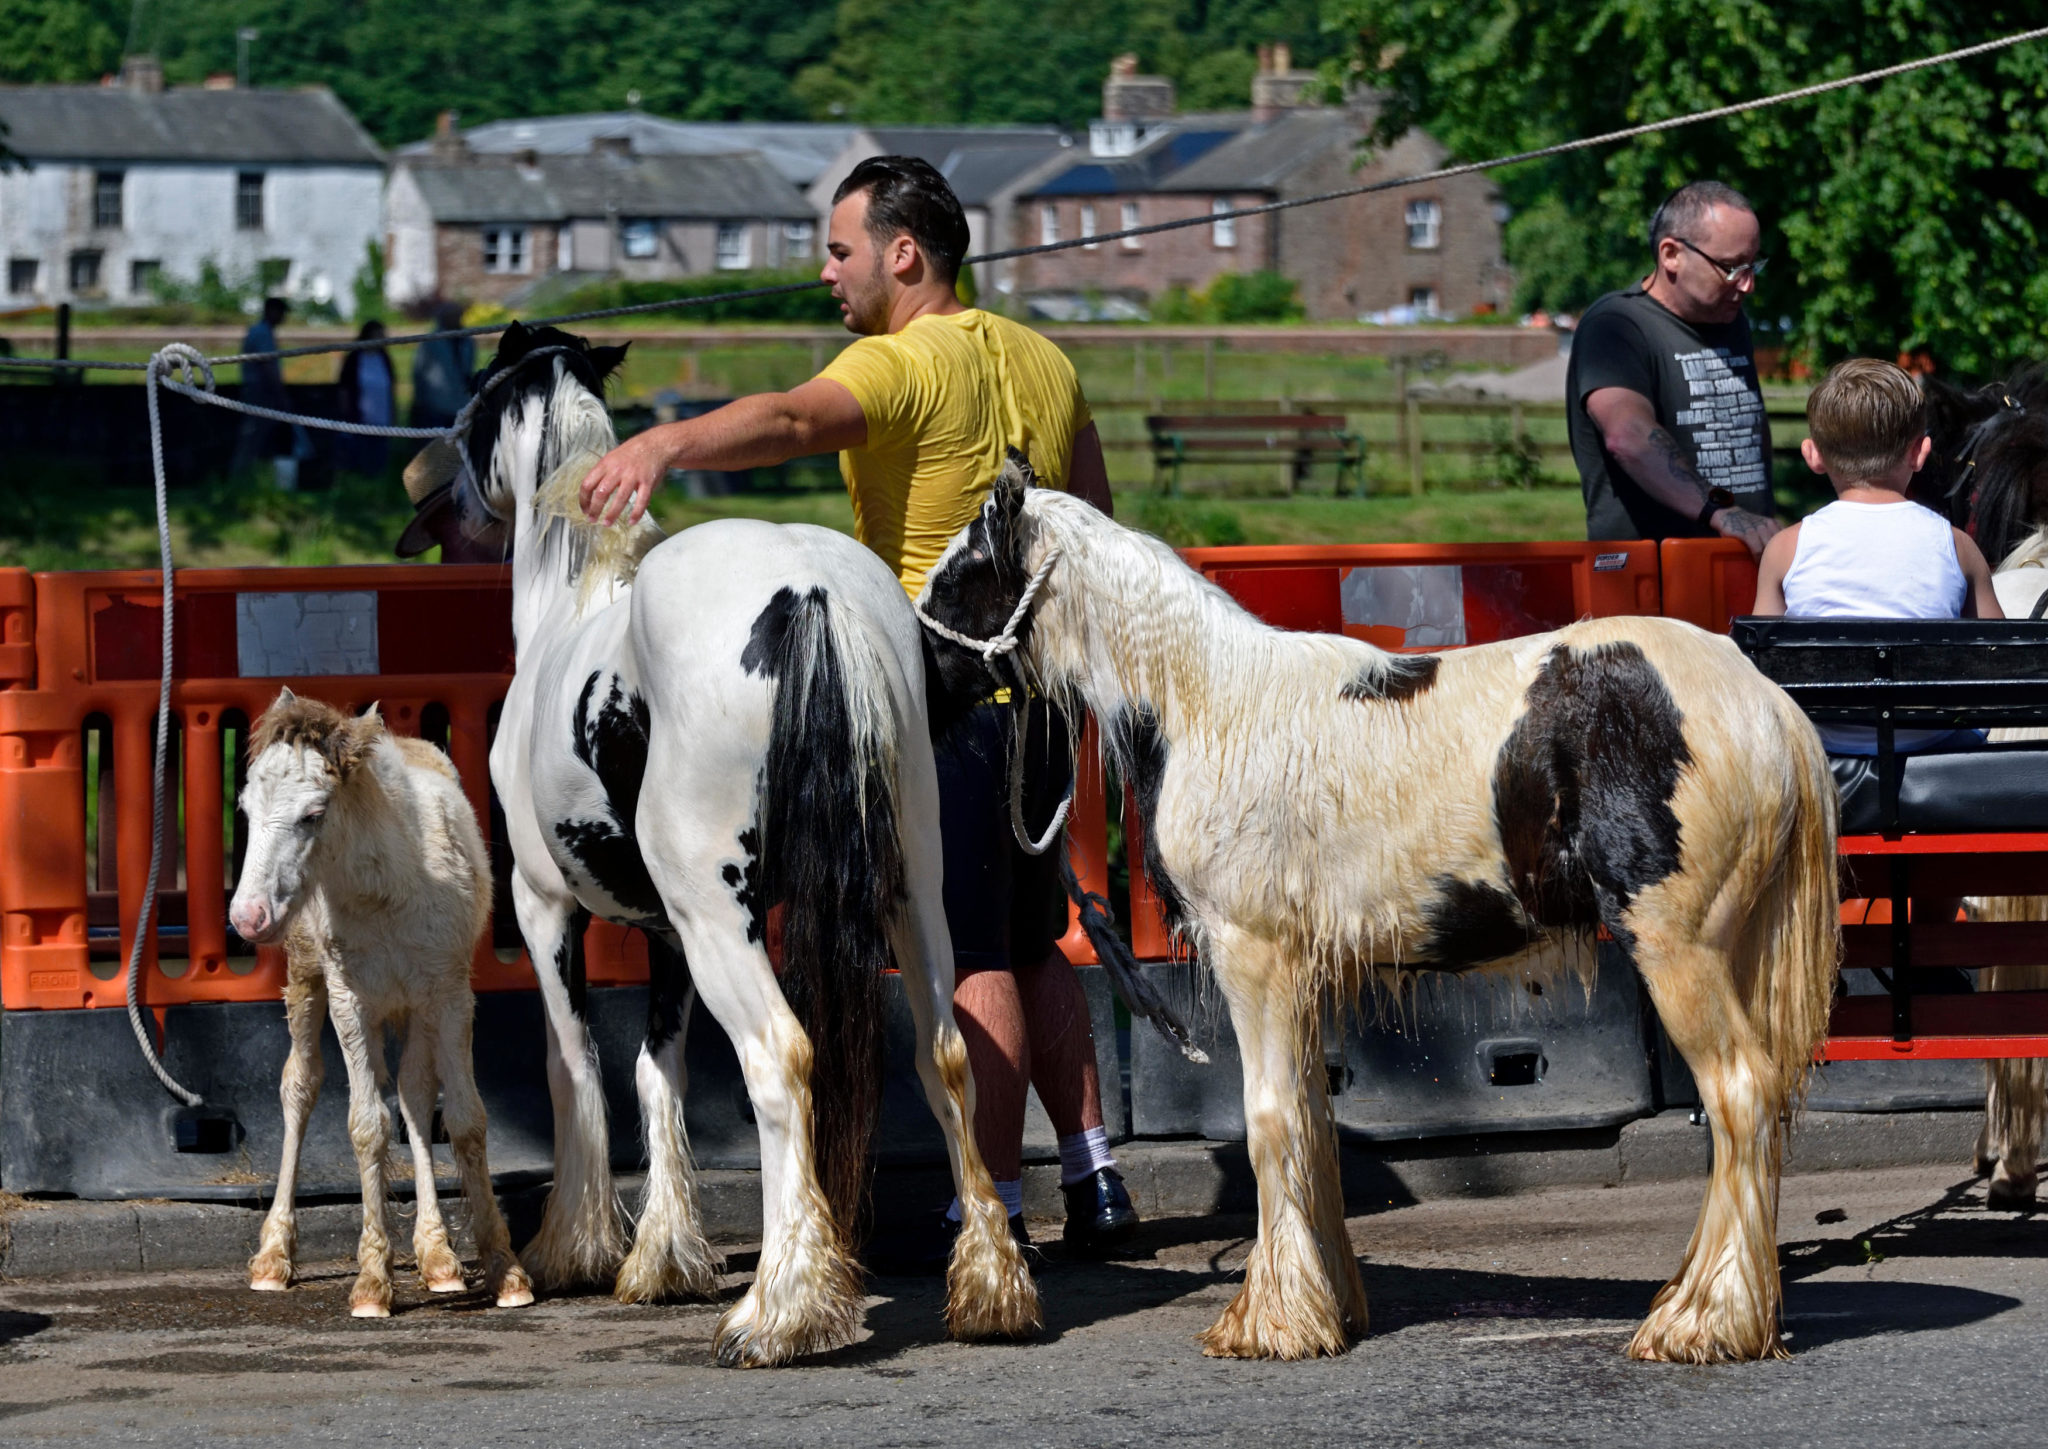 A Traveller with Coloured Cobs at the Appleby Horse Fair in Cumbria, England in June 2018